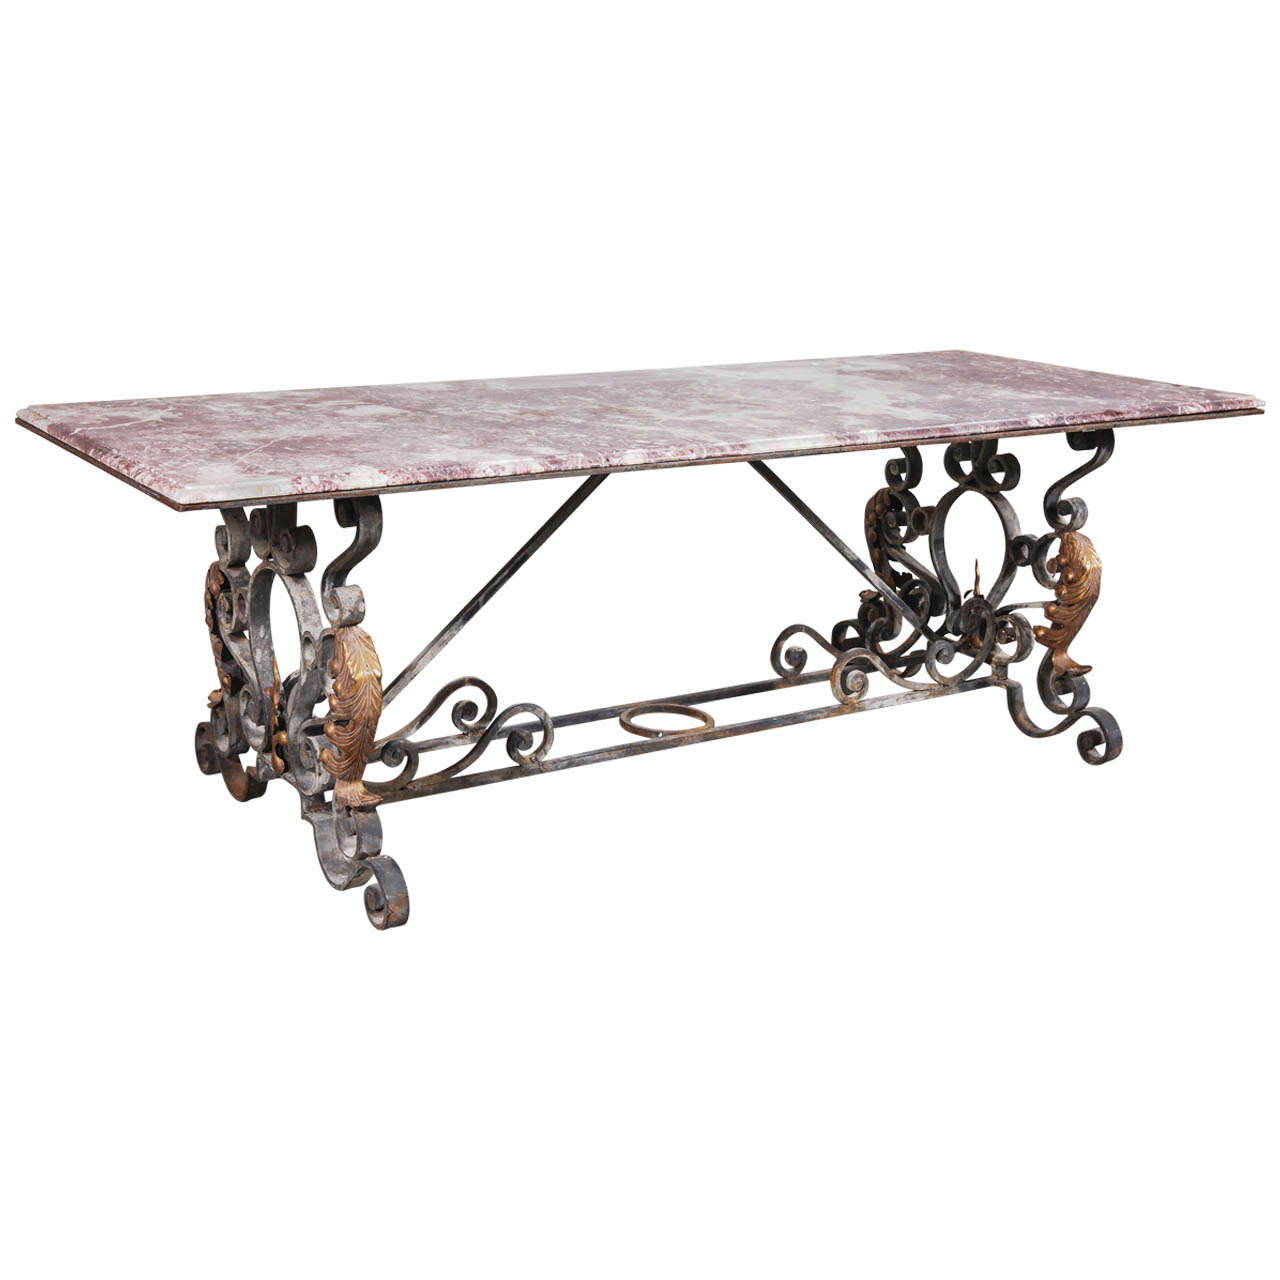 Napoleon III Marble and Iron Dining Table from France circa 1870